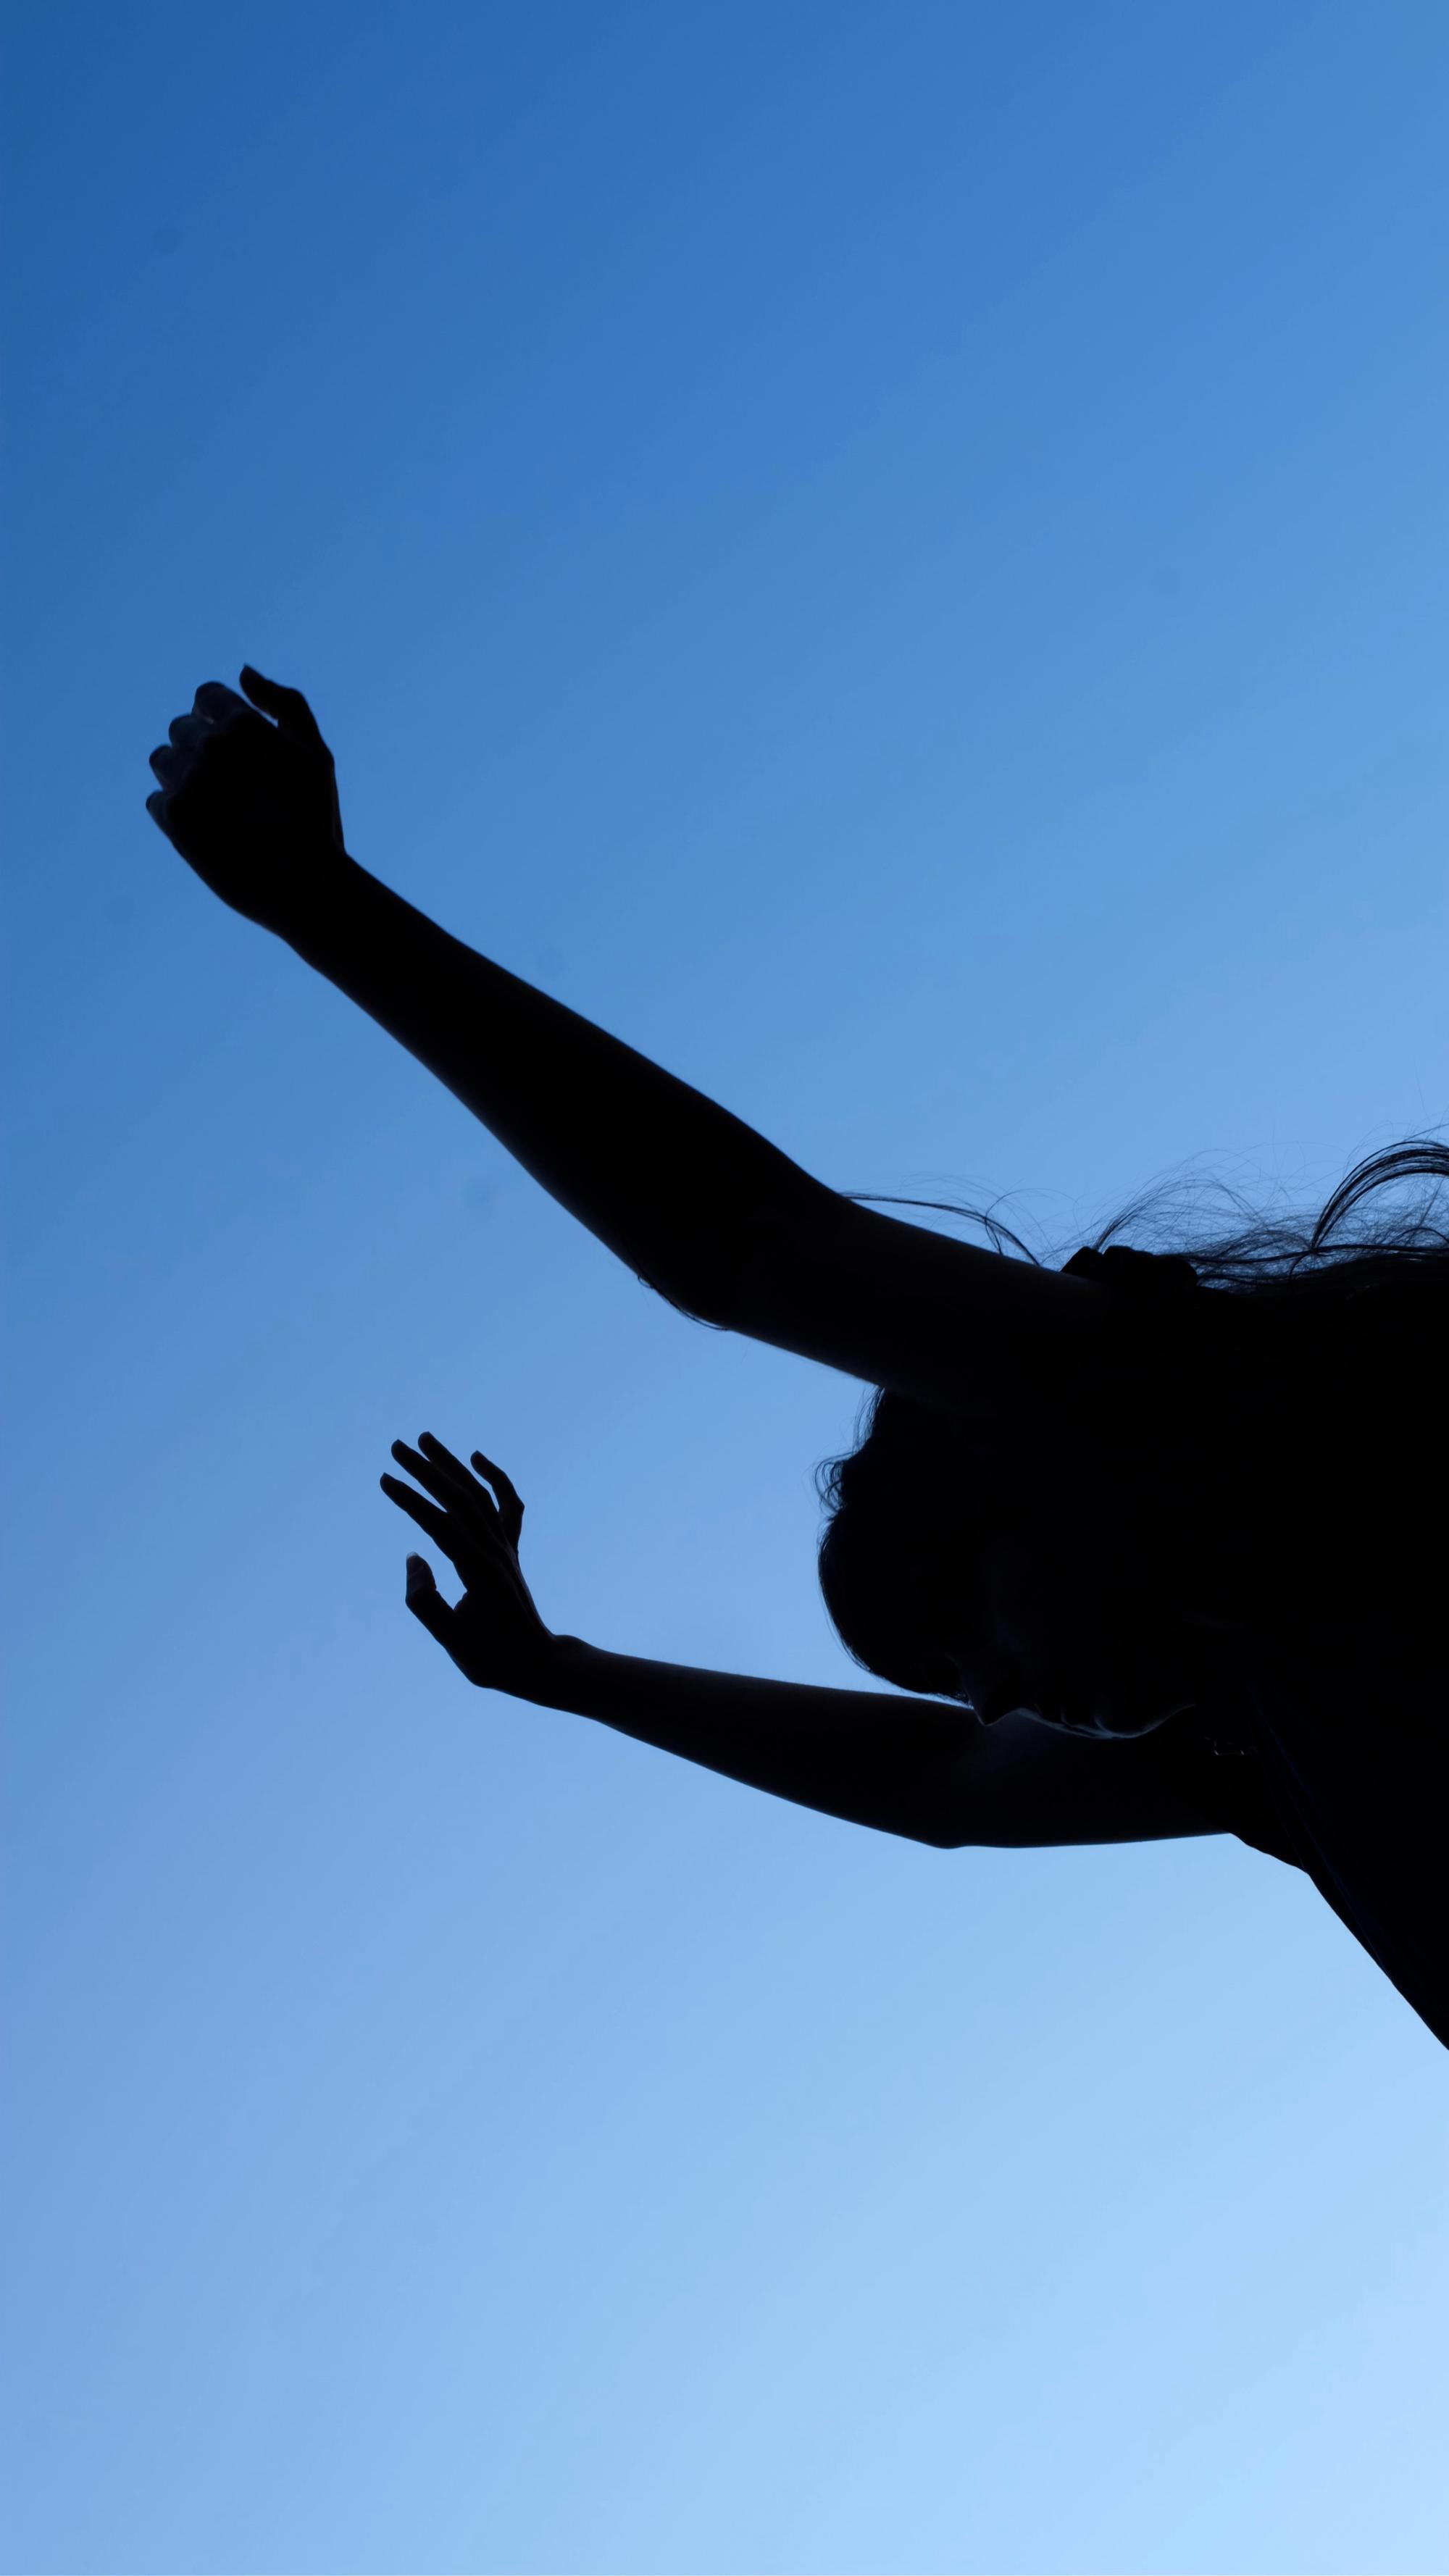 A person reaching their arms ups. The image is rotated so the horizon line is vertical. They are backlit with a blue sky.